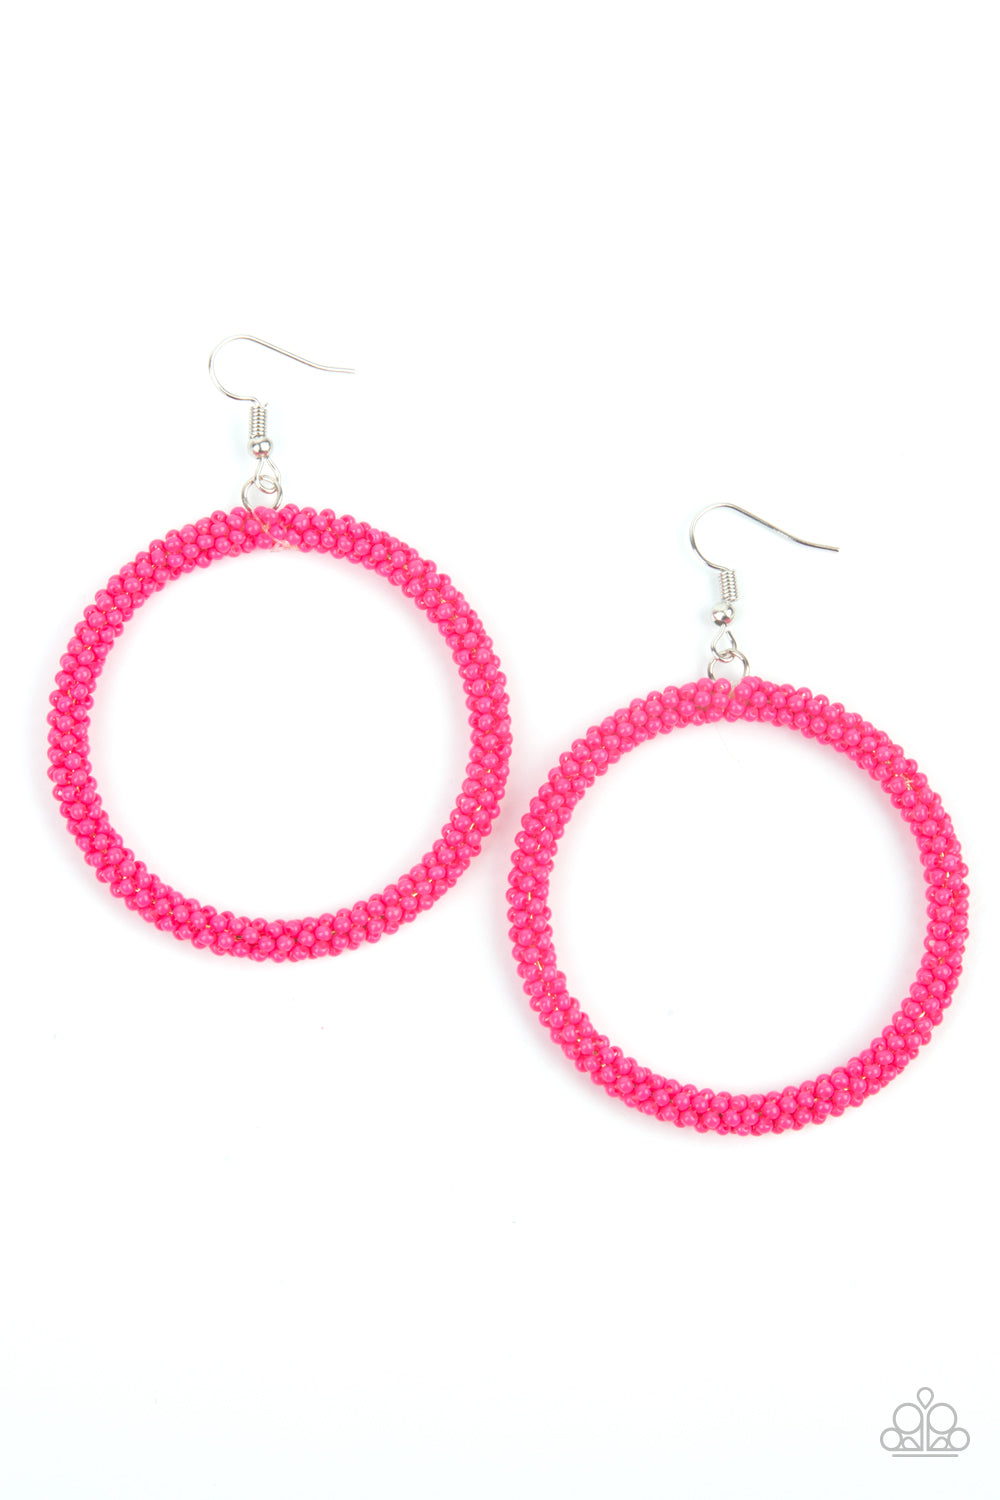 Paparazzi Beauty and the BEACH - Pink Earrings - A Finishing Touch Jewelry